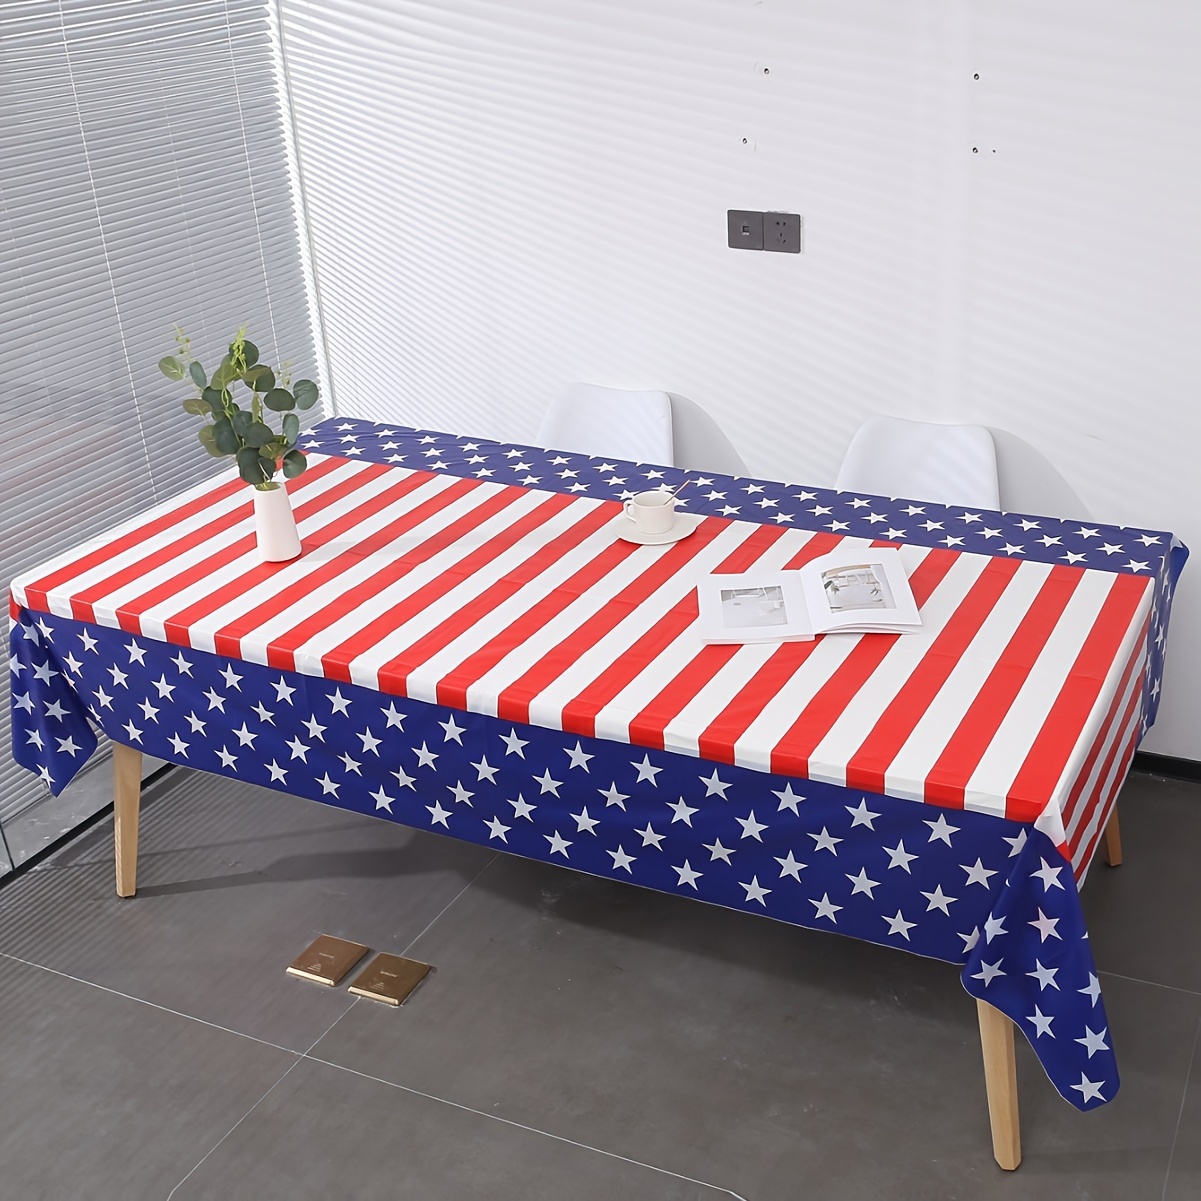 

1pc Independence Day Disposable Tablecloth - Plastic Patriotic American Flag Theme Table Cover For July 4th Holiday Party And Restaurant Decor